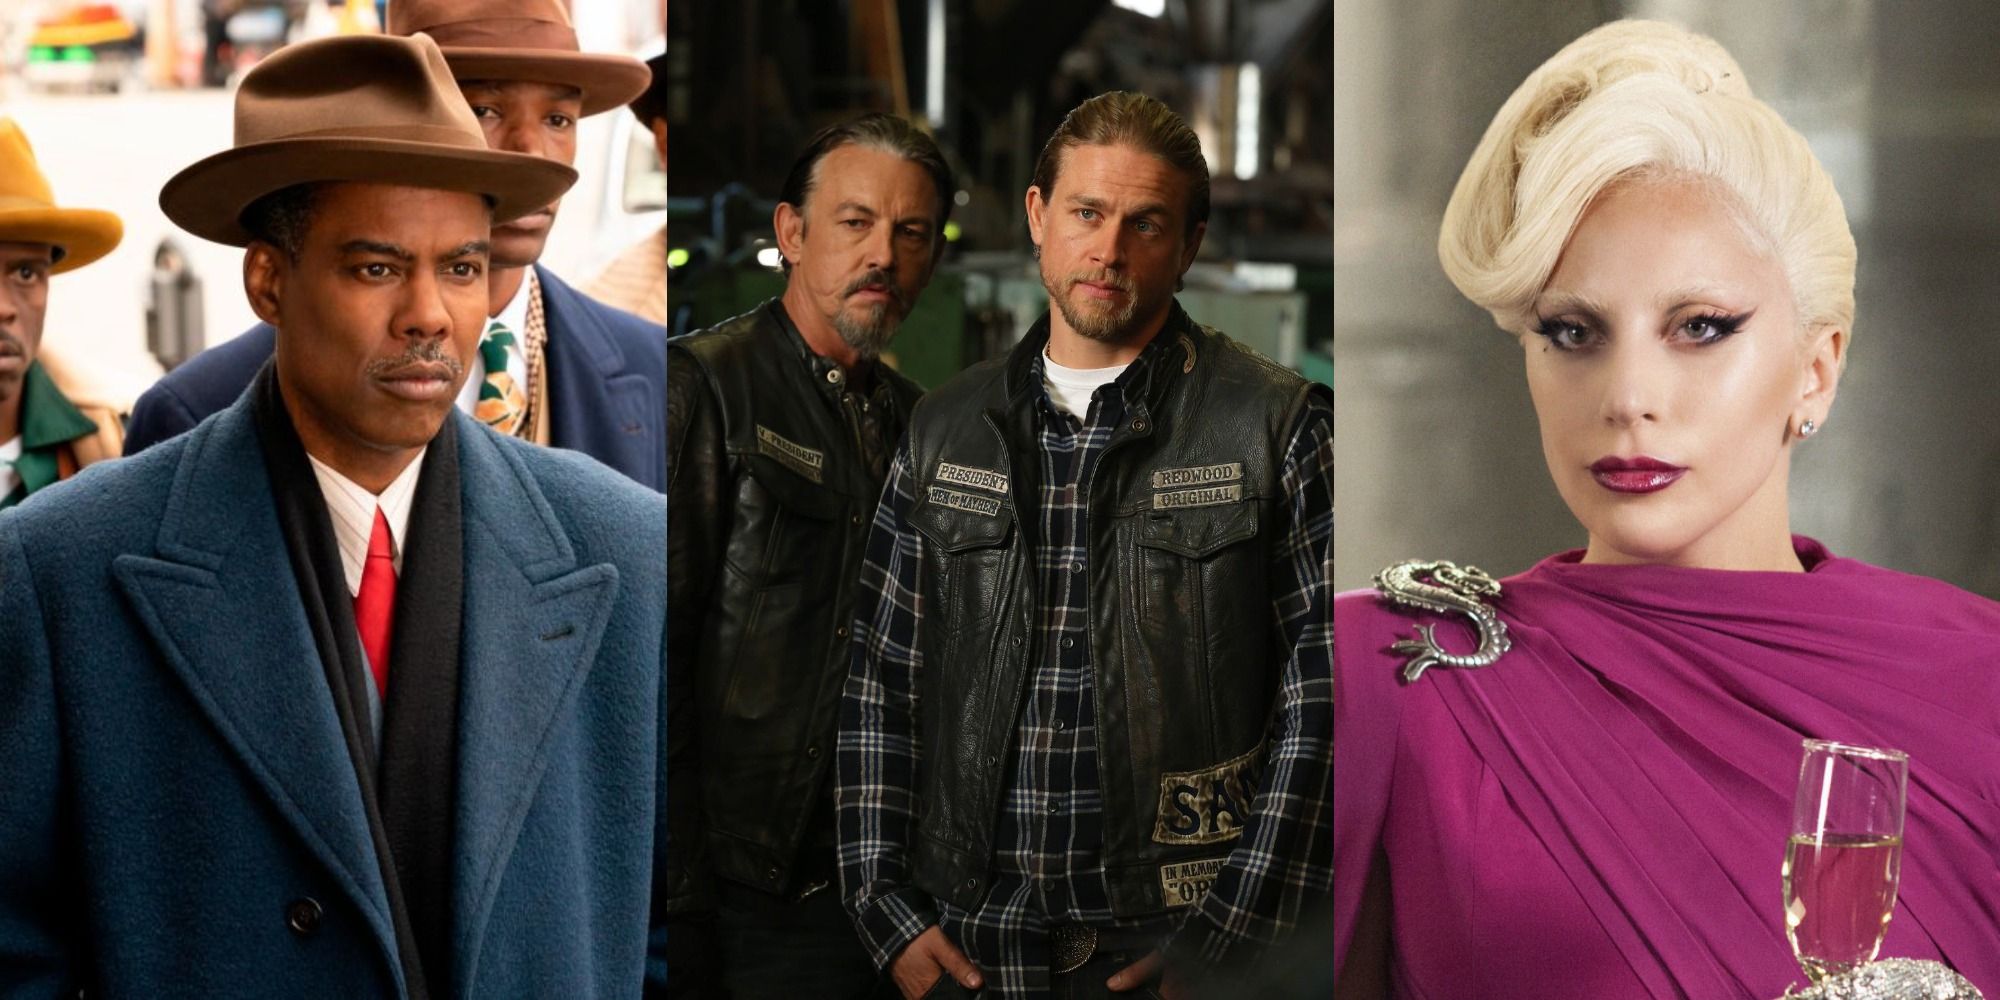 Characters from Fargo, Sons of Anarchy, and American Horror Story